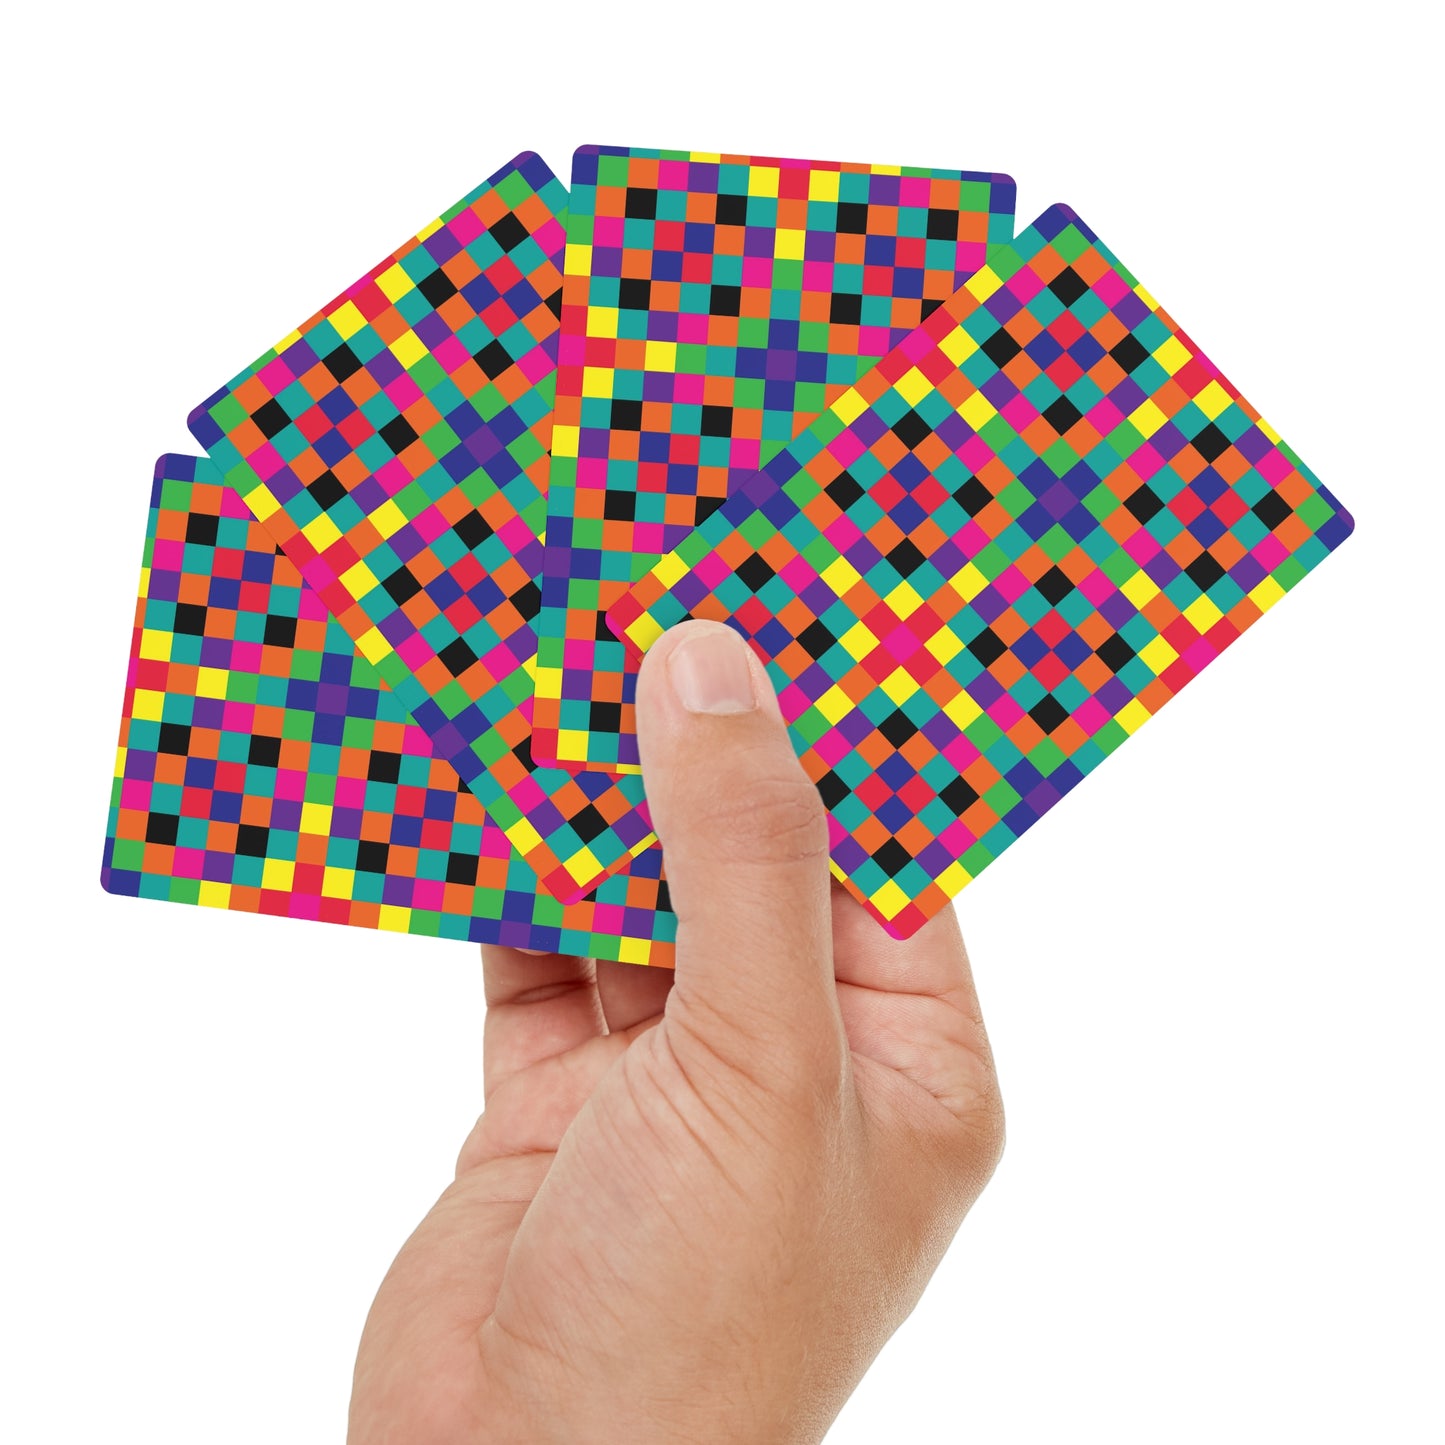 “Infinity” Poker Cards